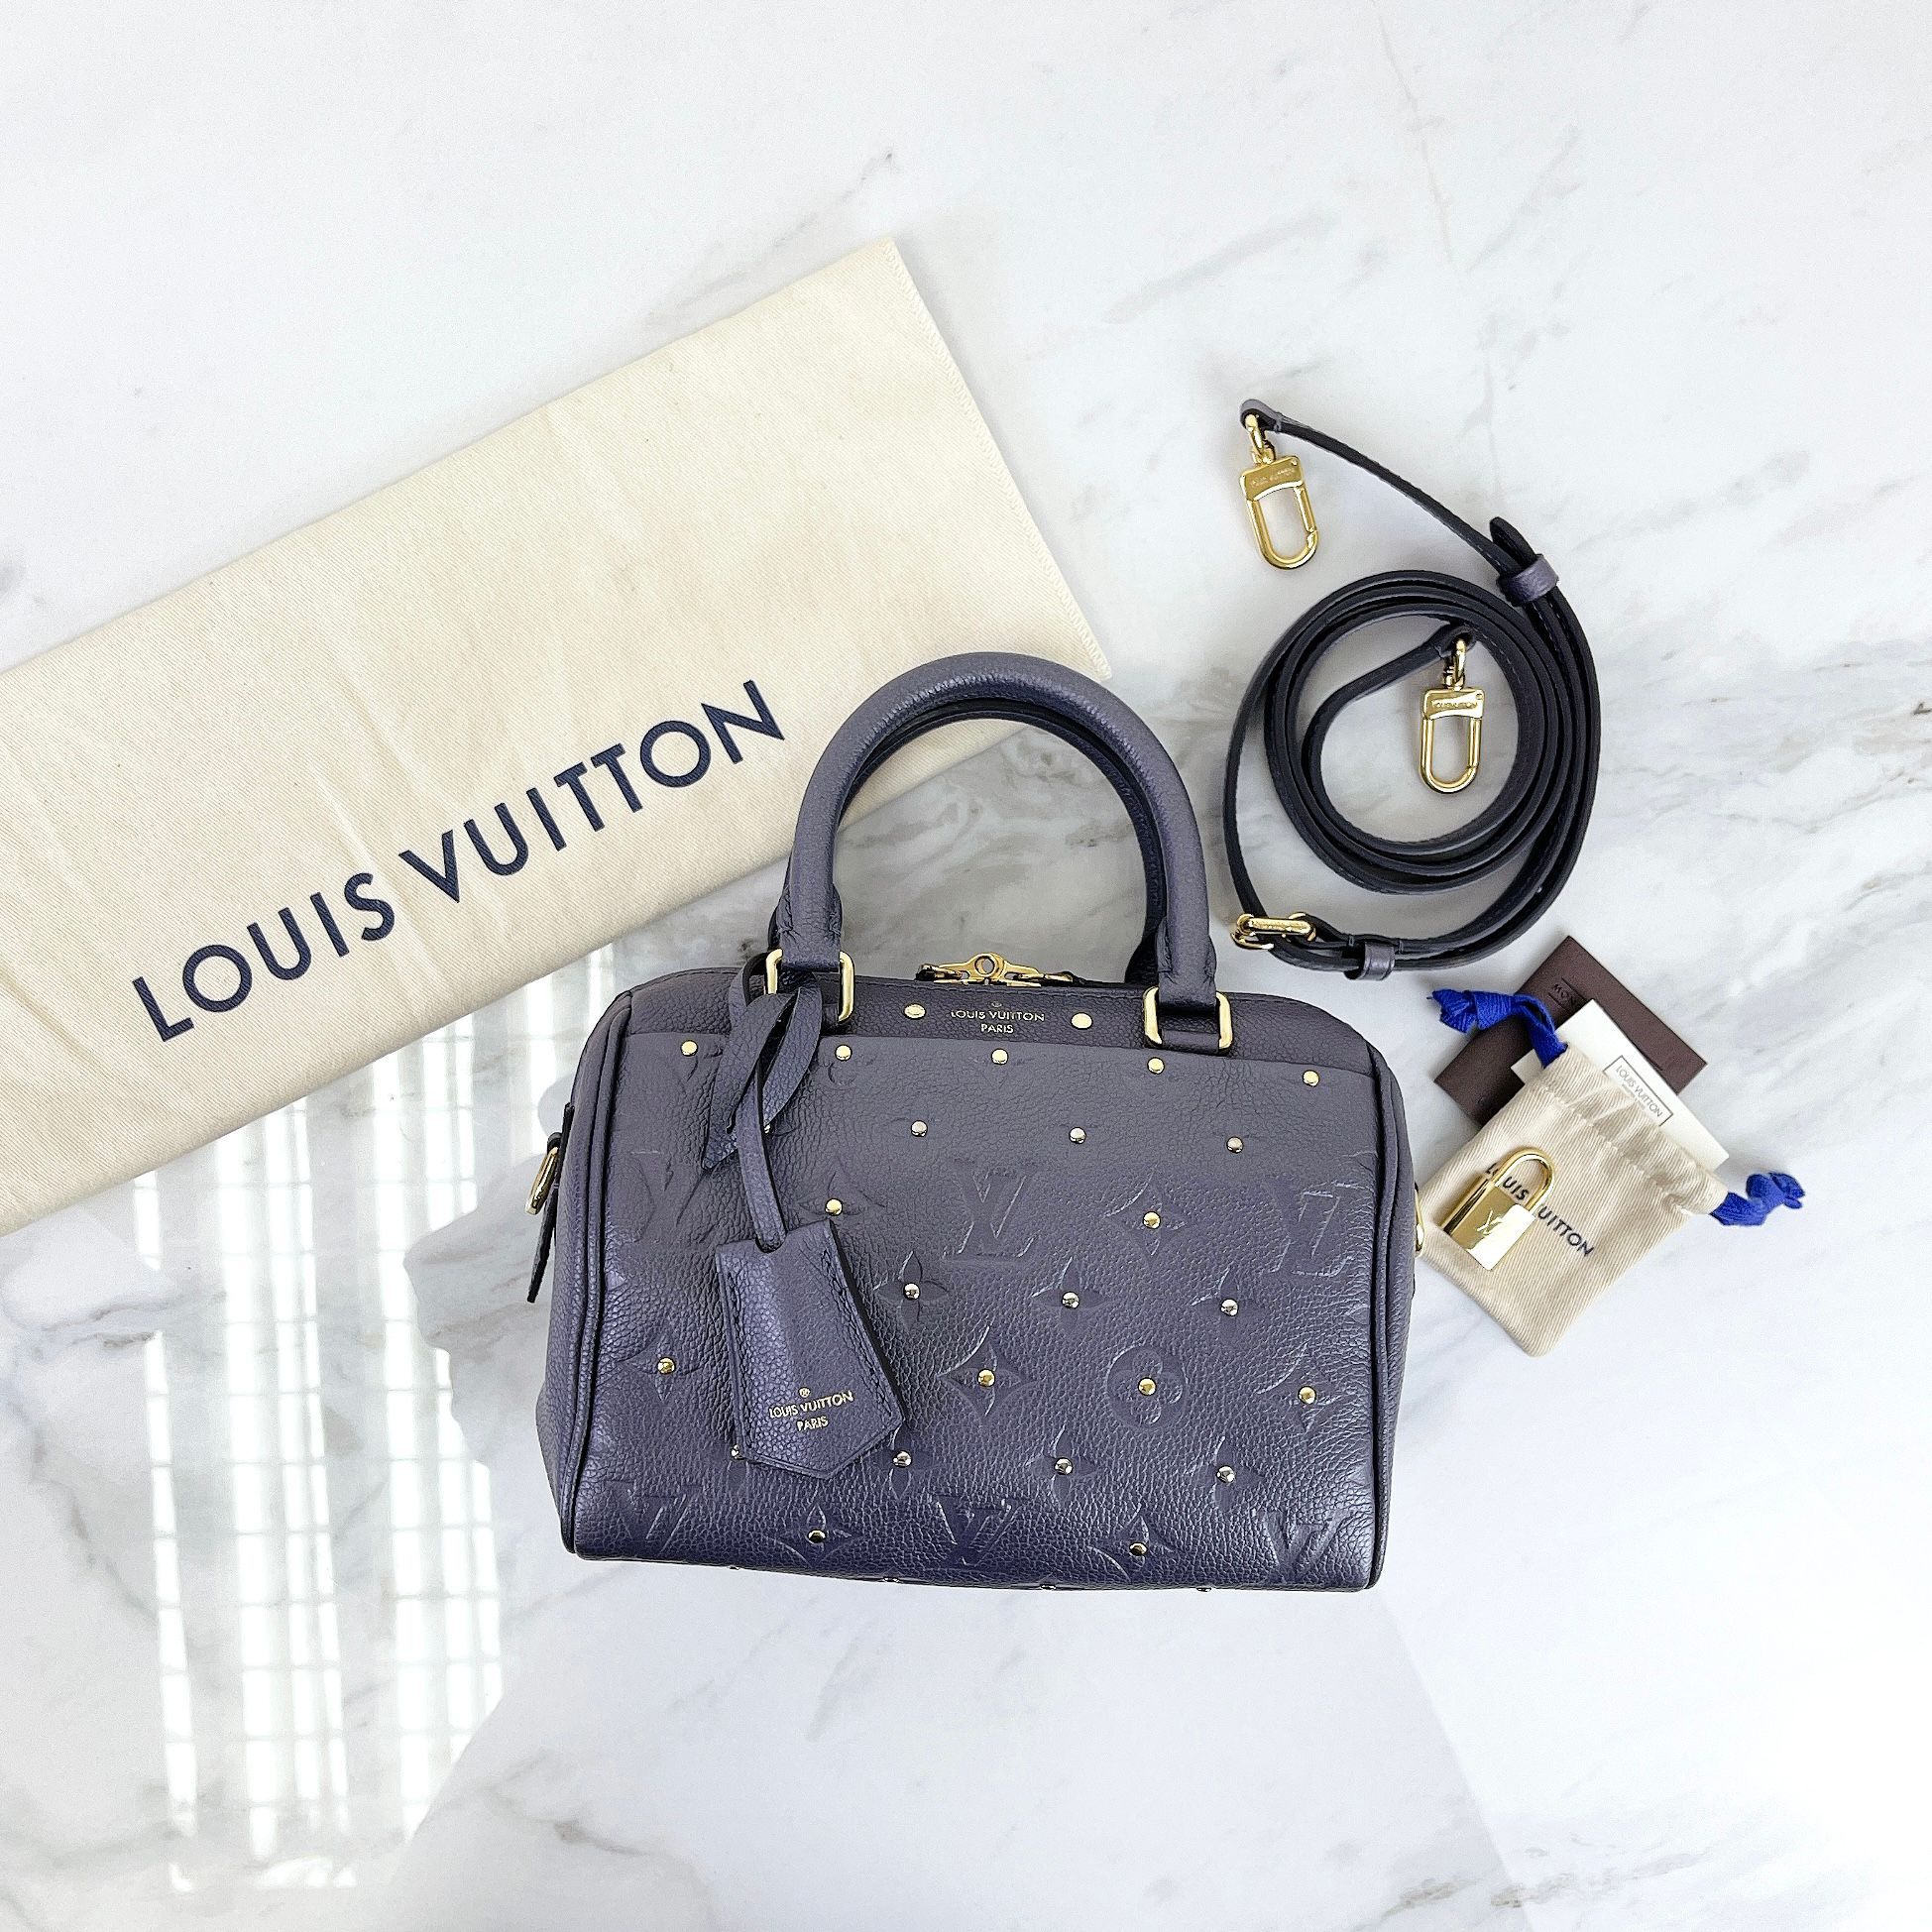 🎒SOLD 🎒LOUIS VUITTON SPEEDY BANDOULIERE 20 Oh my goodness what a beauty!  The broad adjustable and removable stone branded strap als